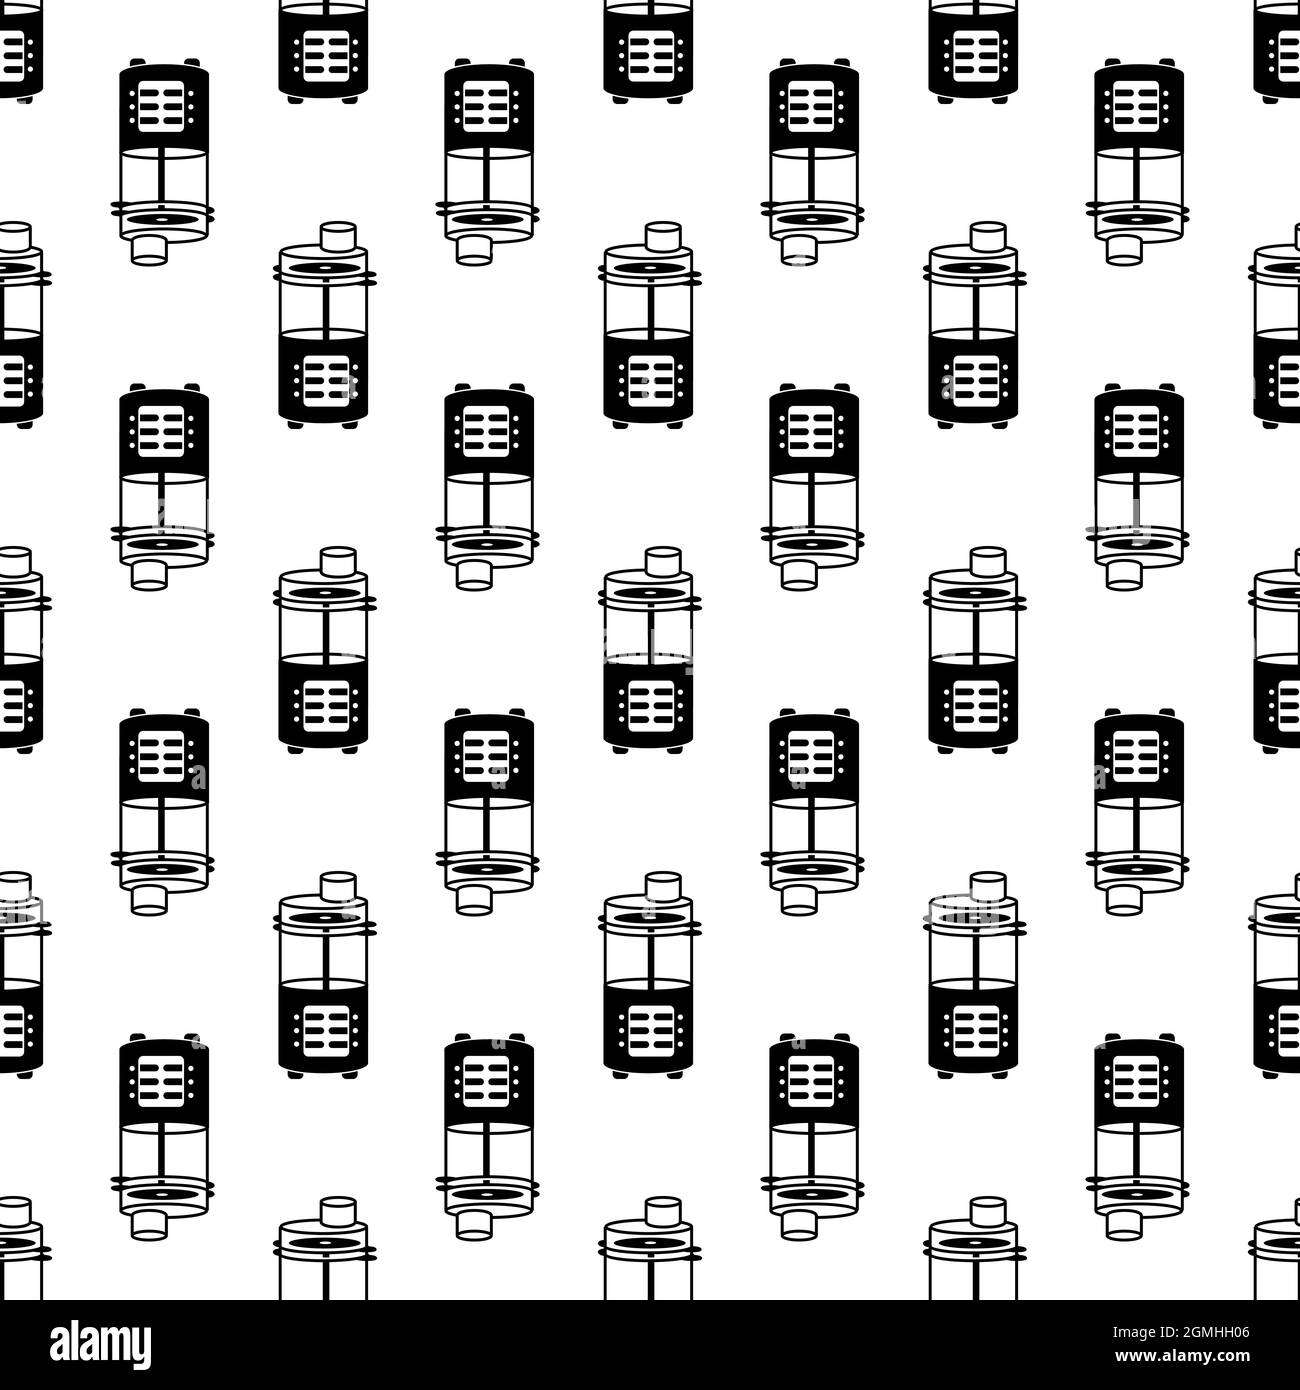 Household food machine pattern seamless background texture repeat wallpaper geometric vector Stock Vector